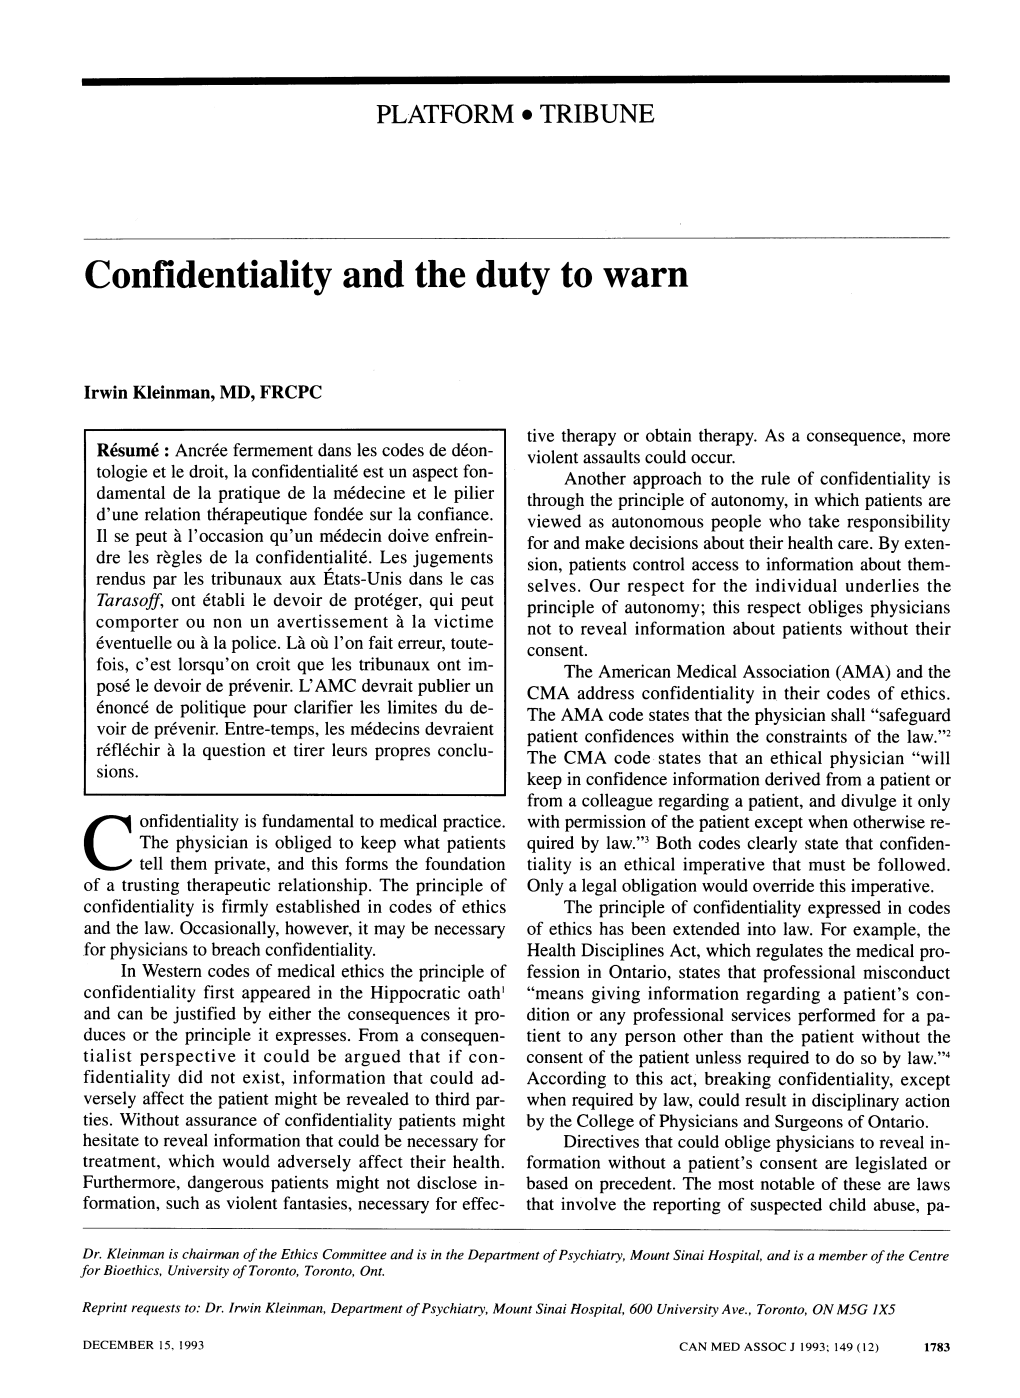 Confidentiality and the Duty to Warn